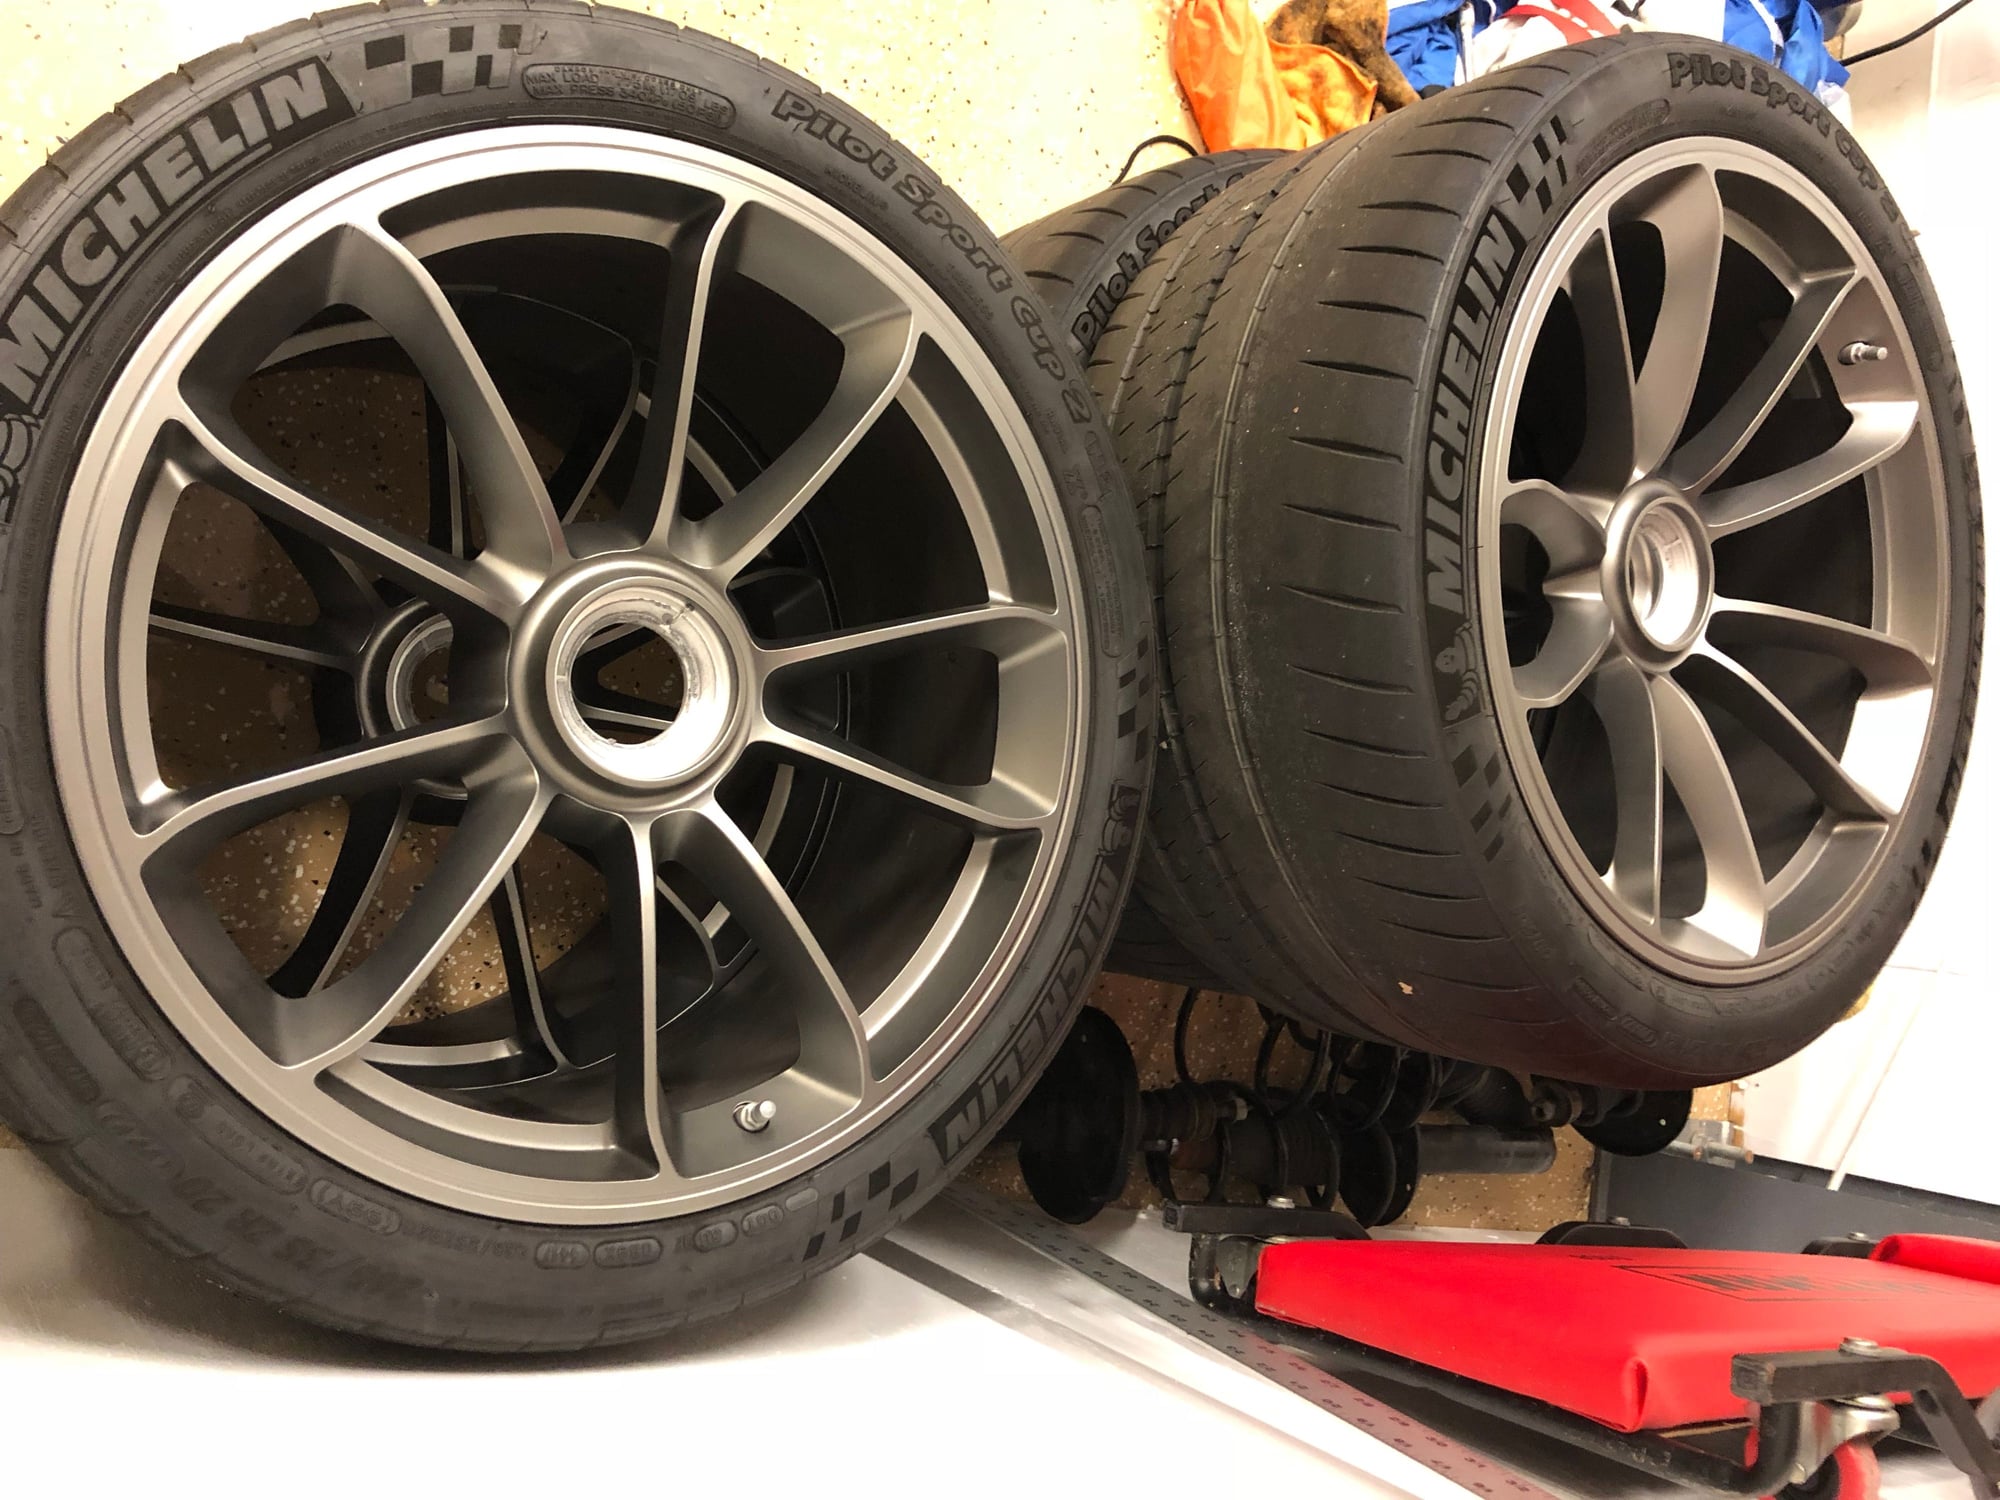 Wheels and Tires/Axles - GT3 RS Wheels and Tires - Used - 2016 to 2019 Porsche GT3 - Melbourne, FL 32901, United States